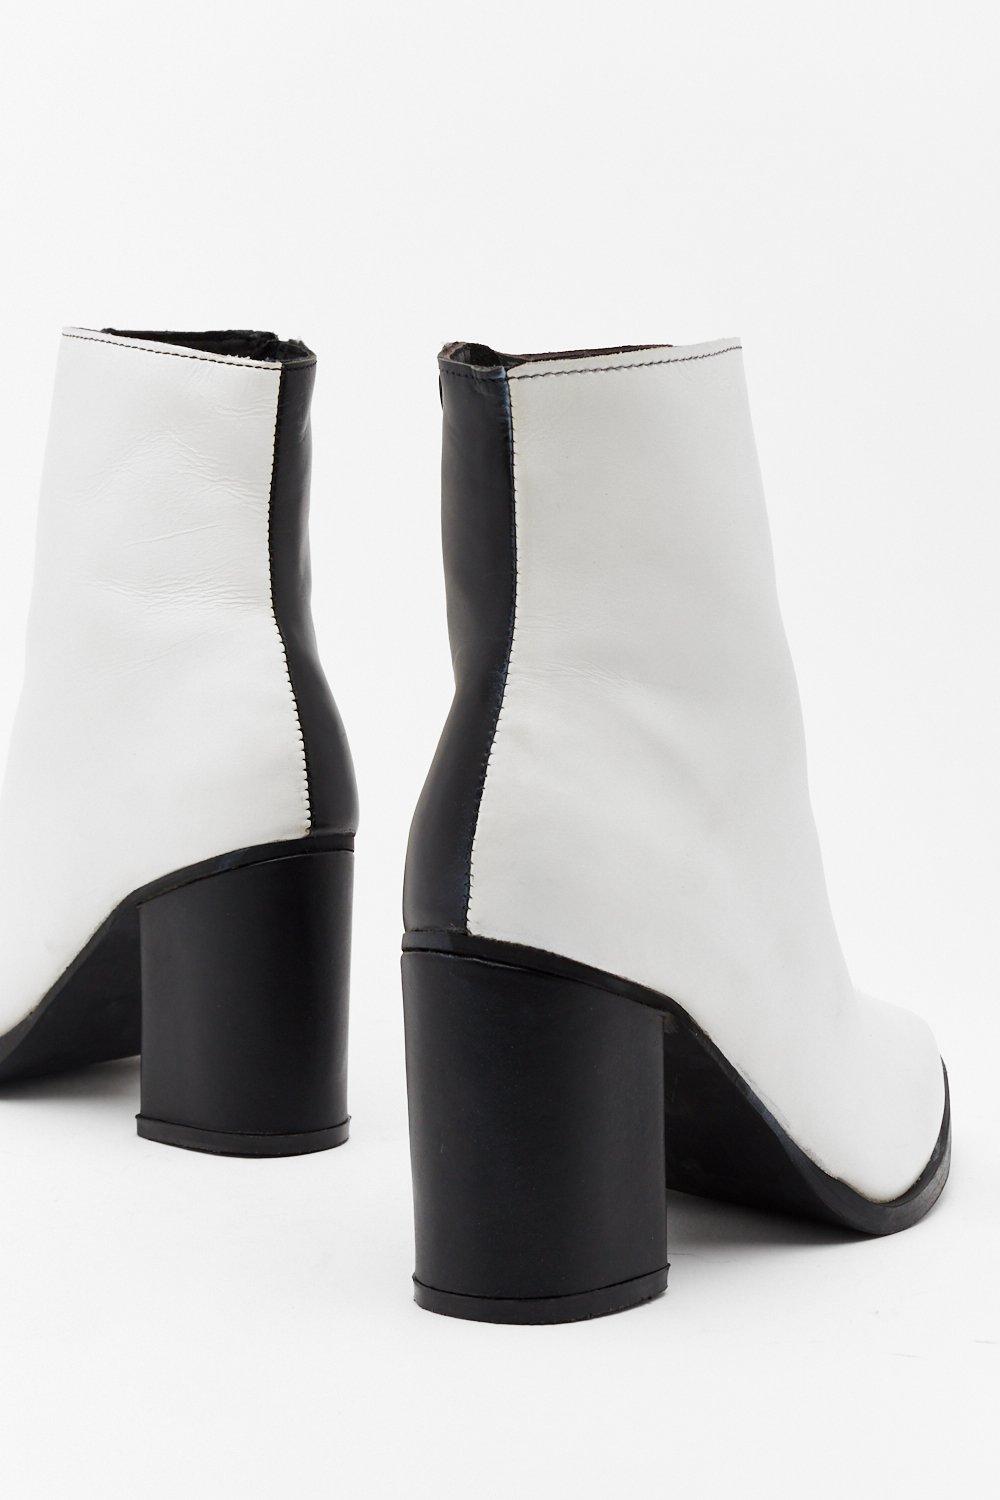 black and white booties shoes